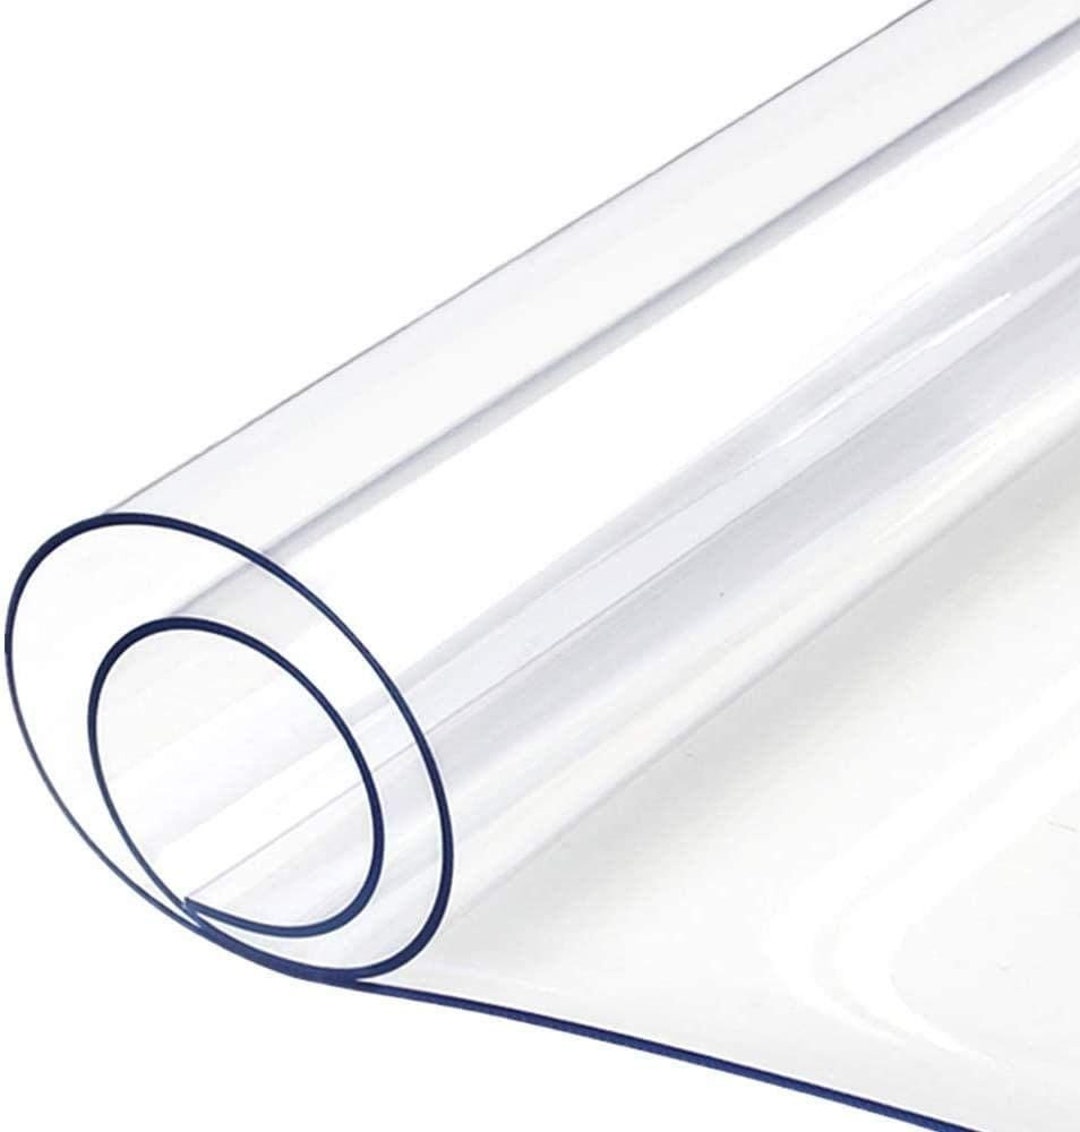 Wholesale Bulk clear pvc window sheets Supplier At Low Prices